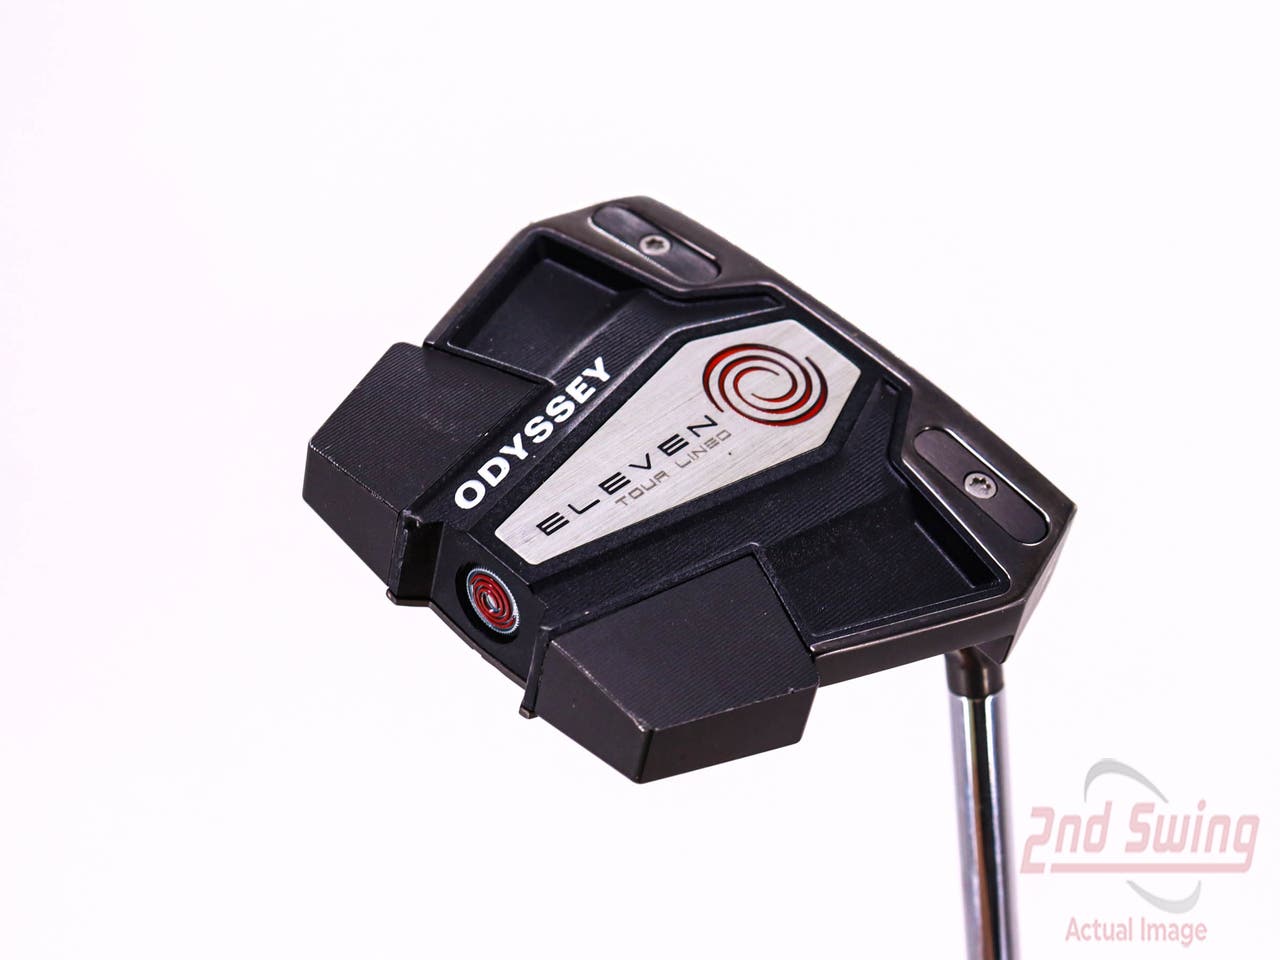 Odyssey Eleven Tour Lined S Putter Steel Right Handed 35.0in